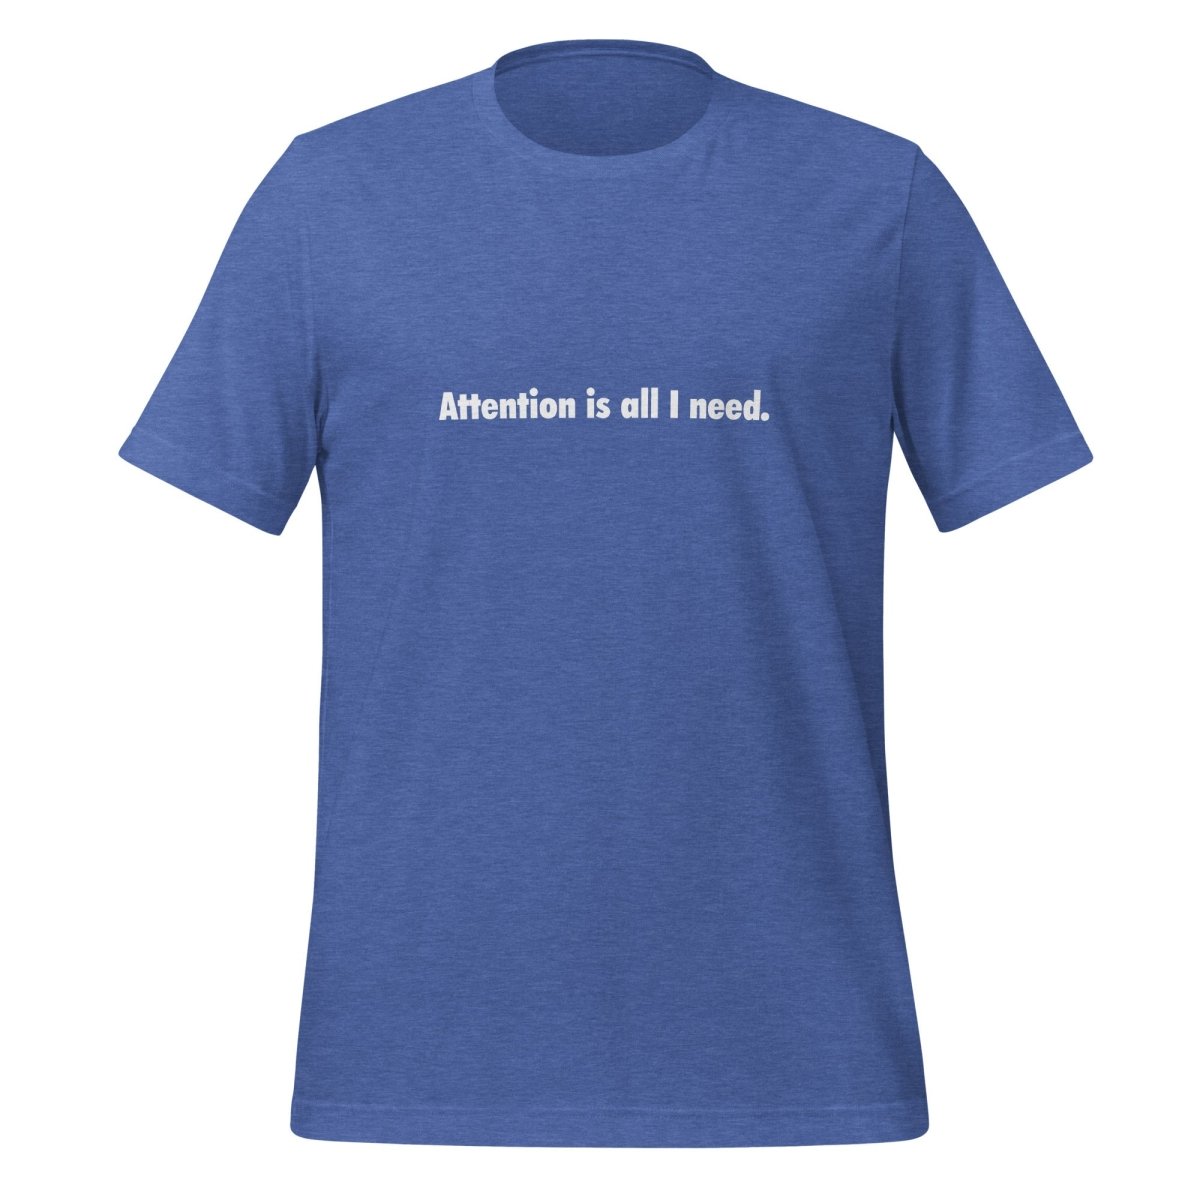 Attention is all I need. T - Shirt (unisex) - Heather True Royal - AI Store